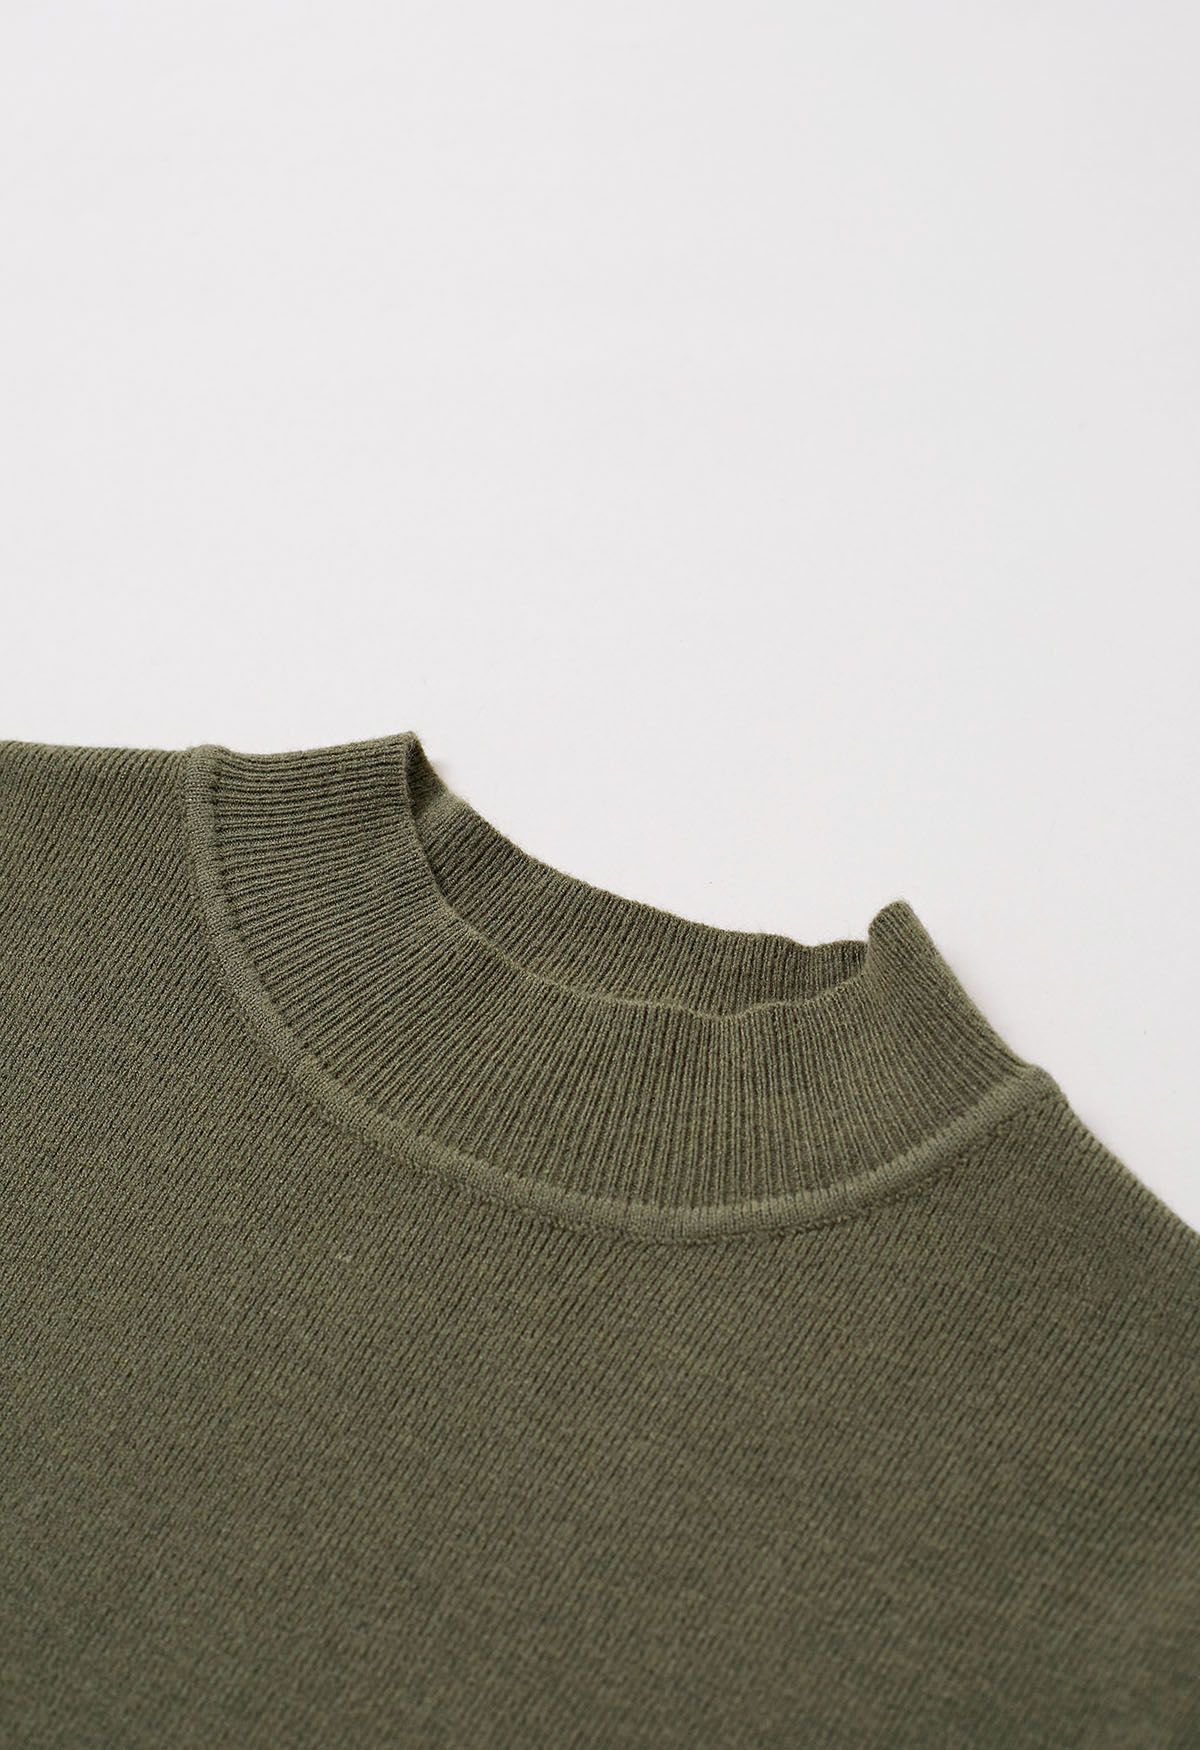 Mock Neck Elbow Sleeve Knit Top in Olive